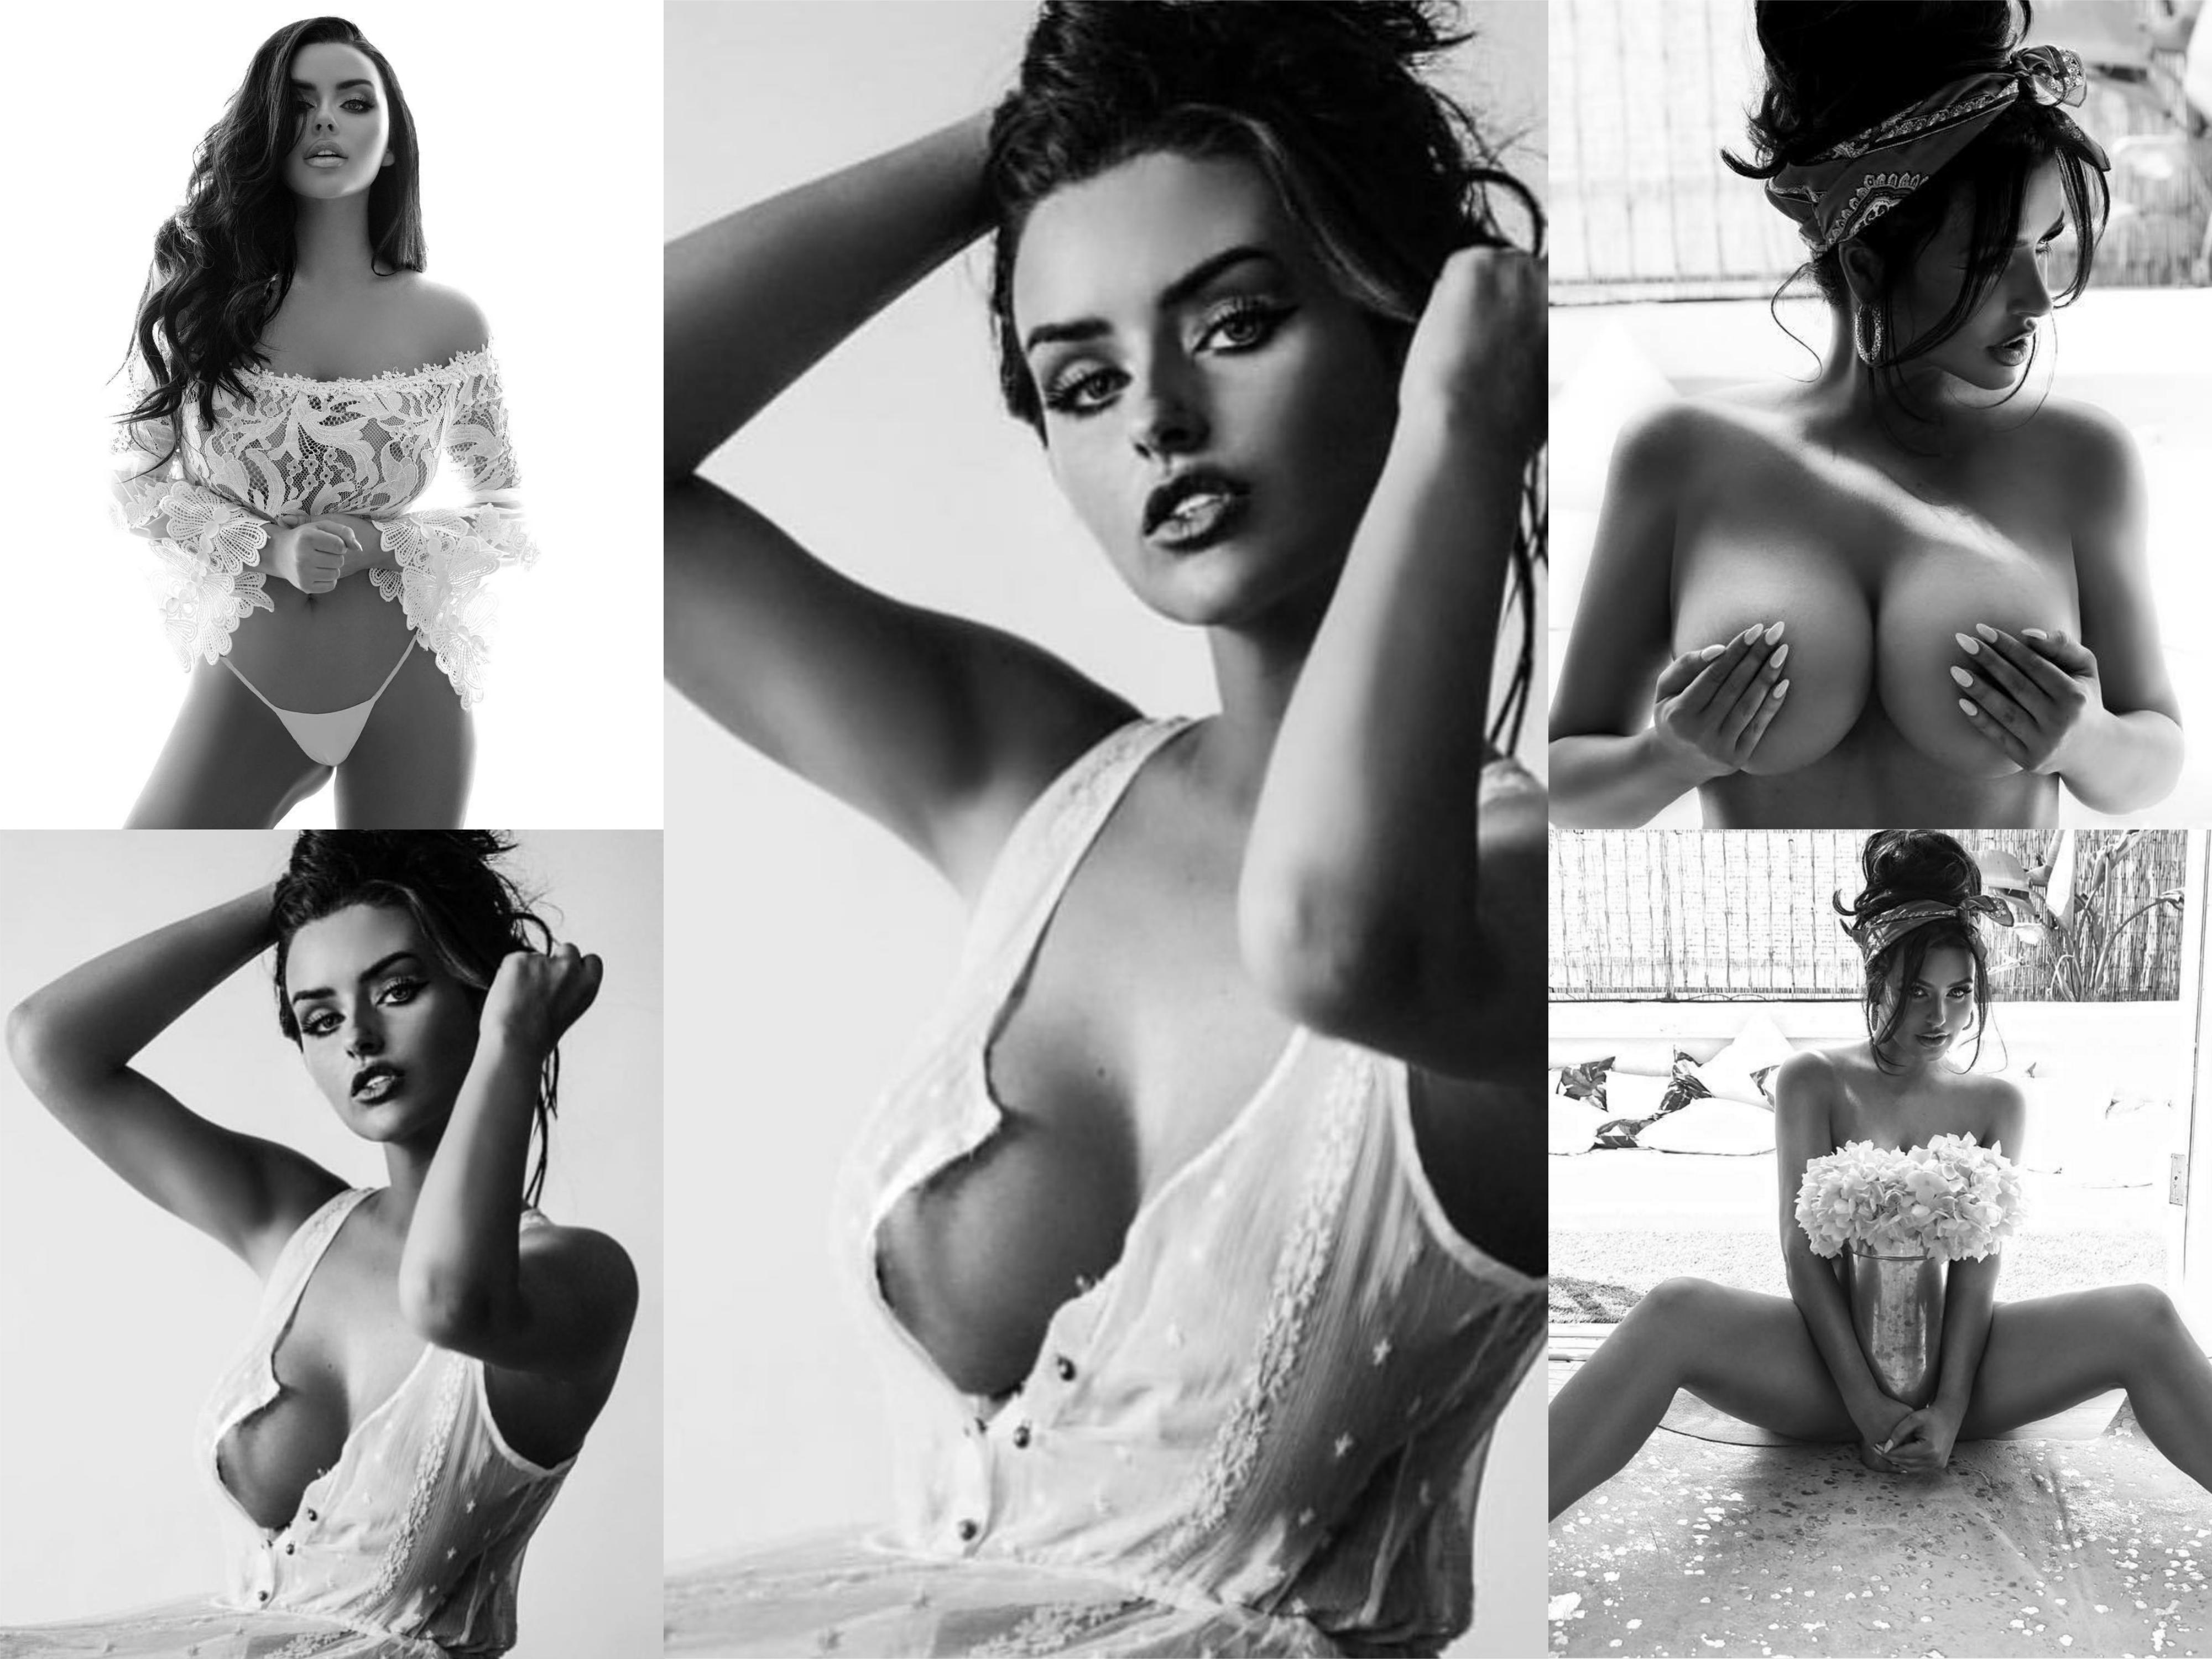 Abigail Ratchford Photo Collages - Nude Celebrity Pictures.